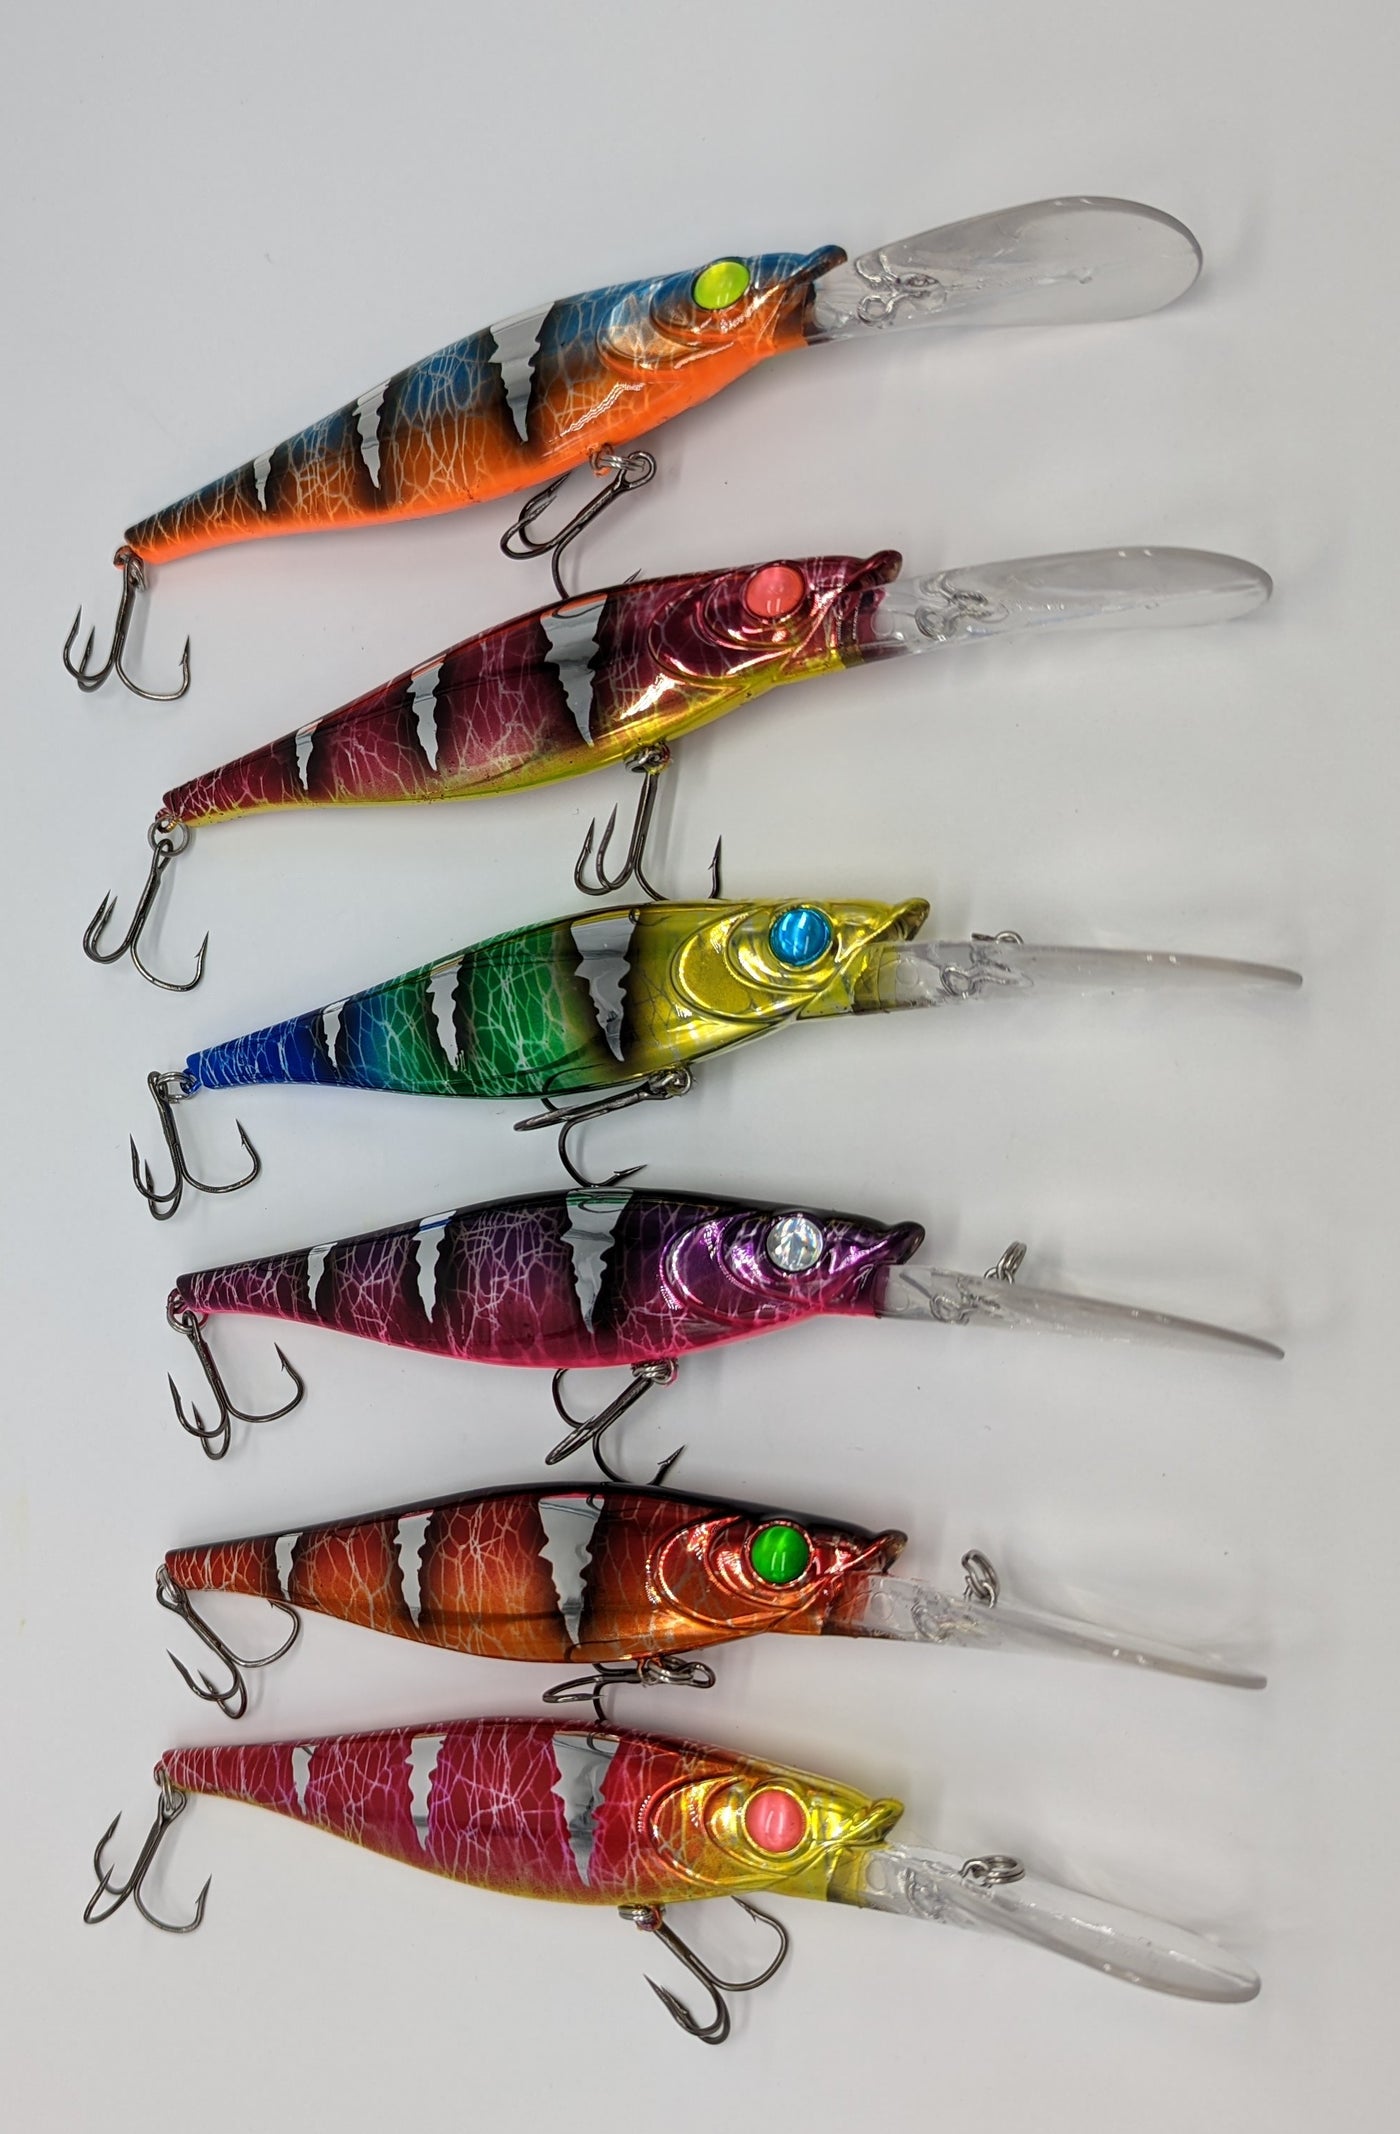 Netcraft Waterbased Fishing Lure Paint Kit - 12 Color Lure Paint